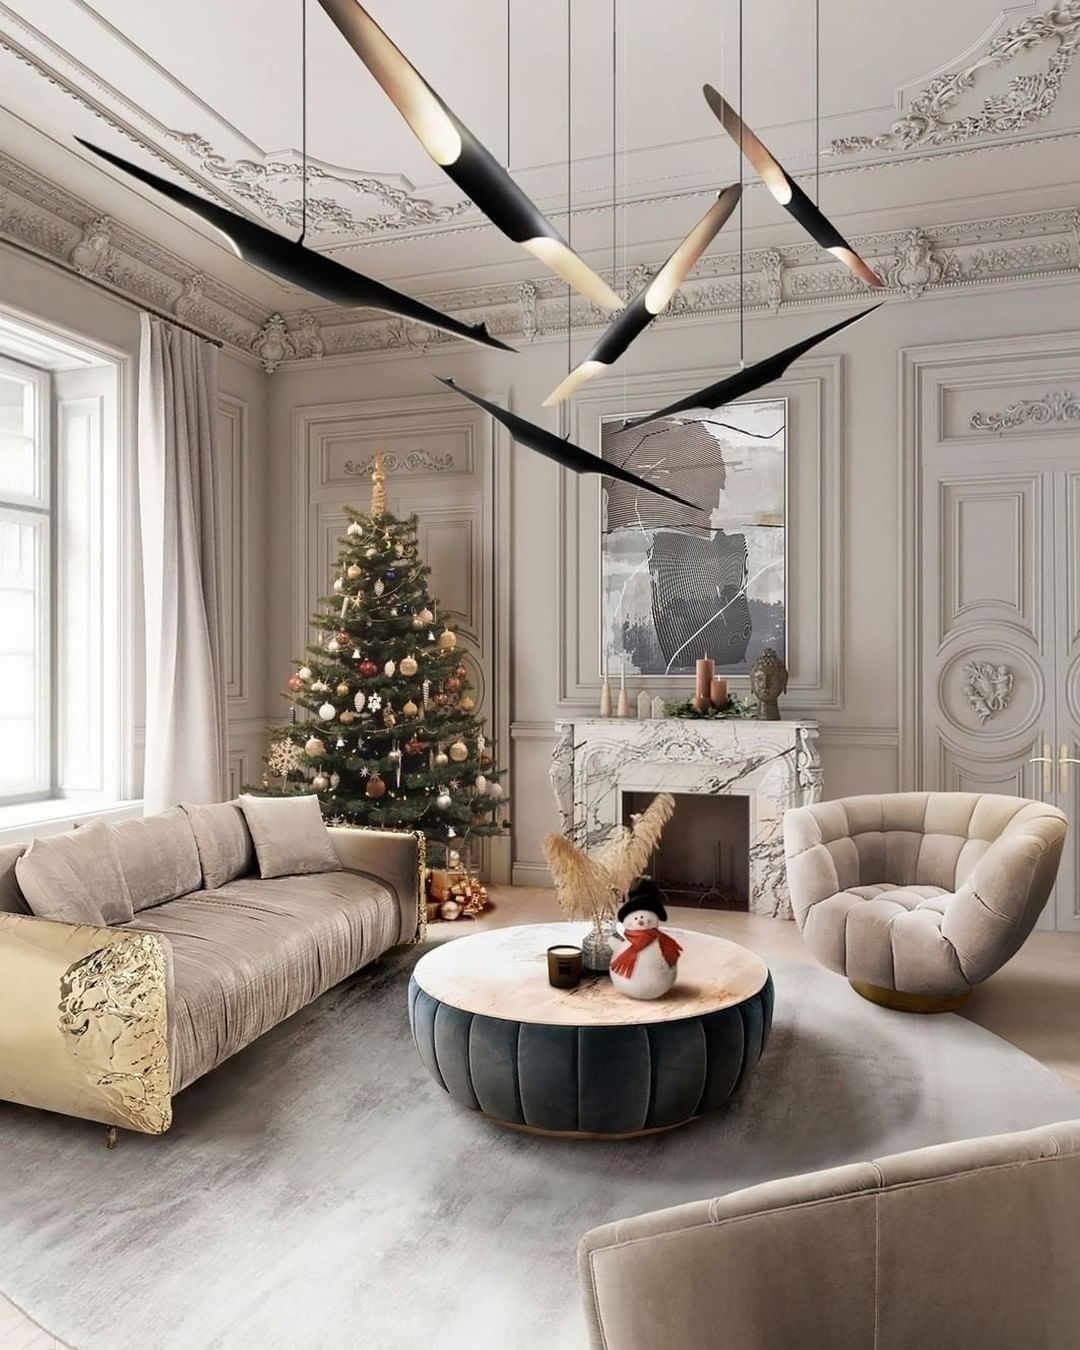 Christmas living room design with neutral colors and iconic armchair home inspiration ideas